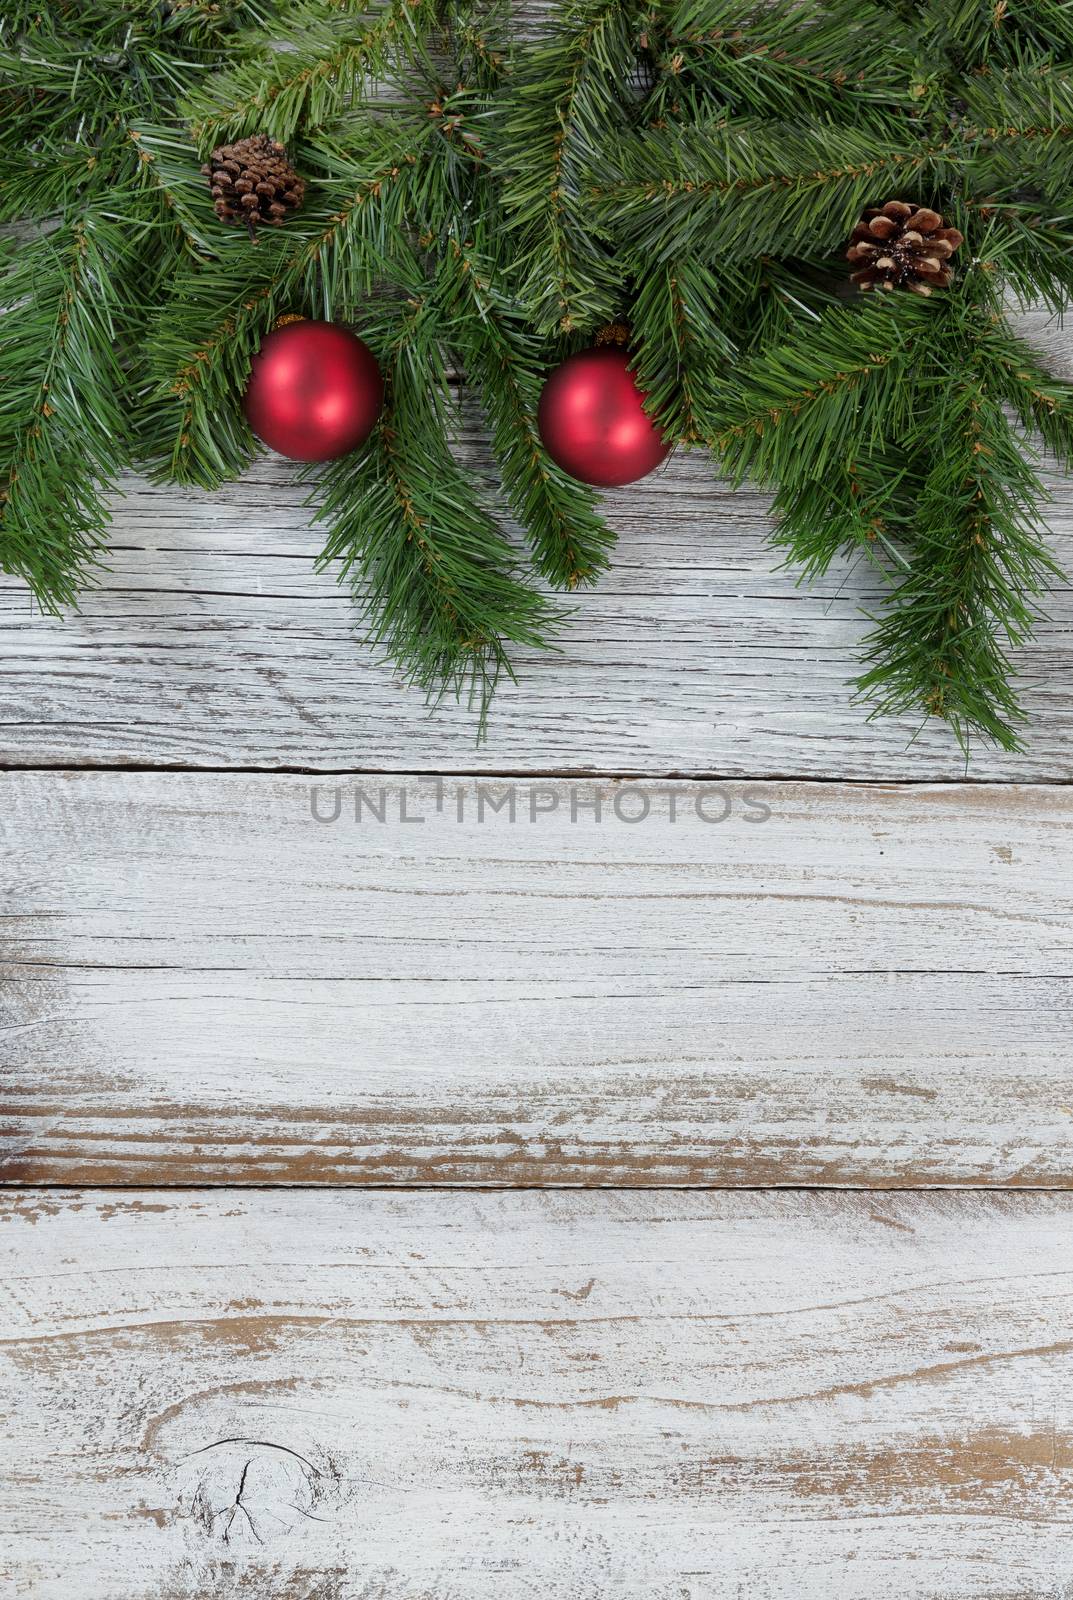 Traditional Christmas evergreen branches with red ball ornaments decorations on rustic knotty wood in flat lay format